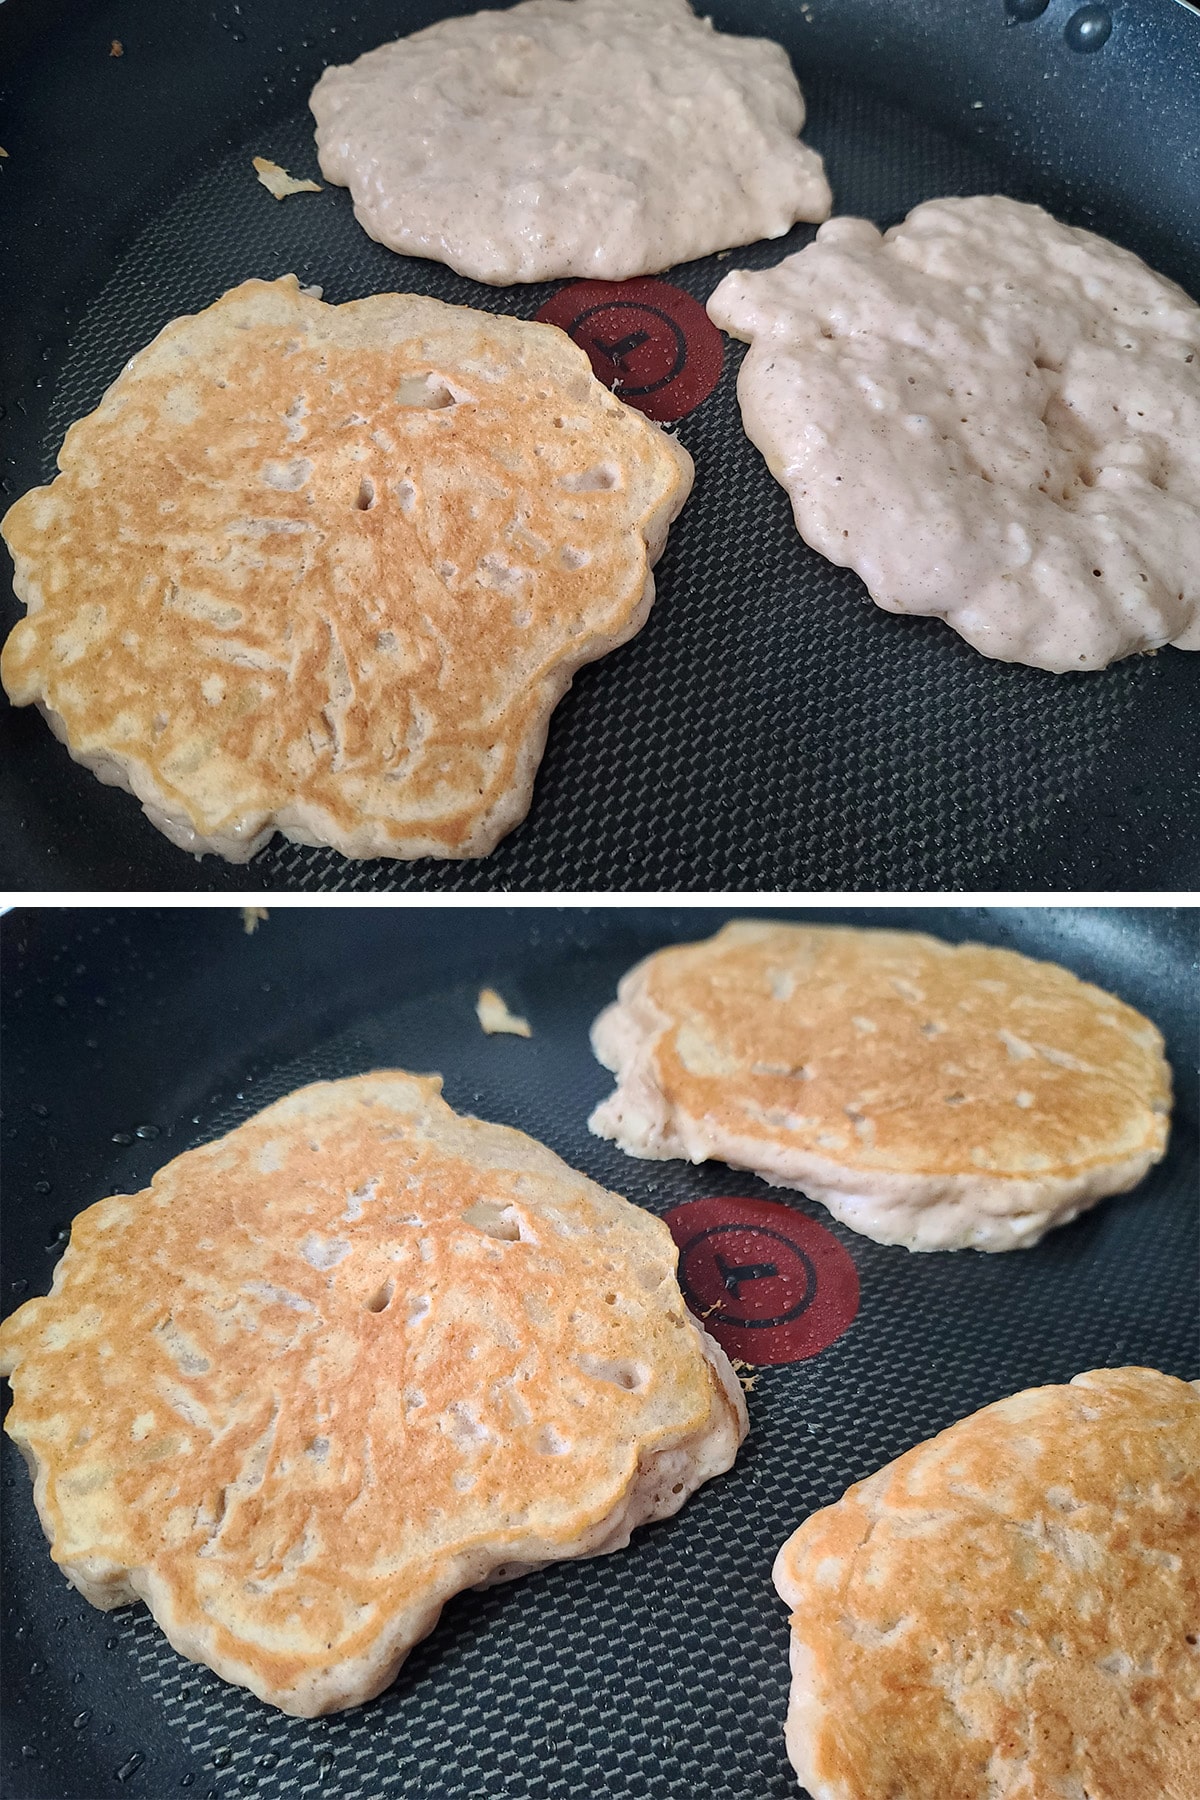 A 2 part image showing the apple pancakes being cooked on a skillet.